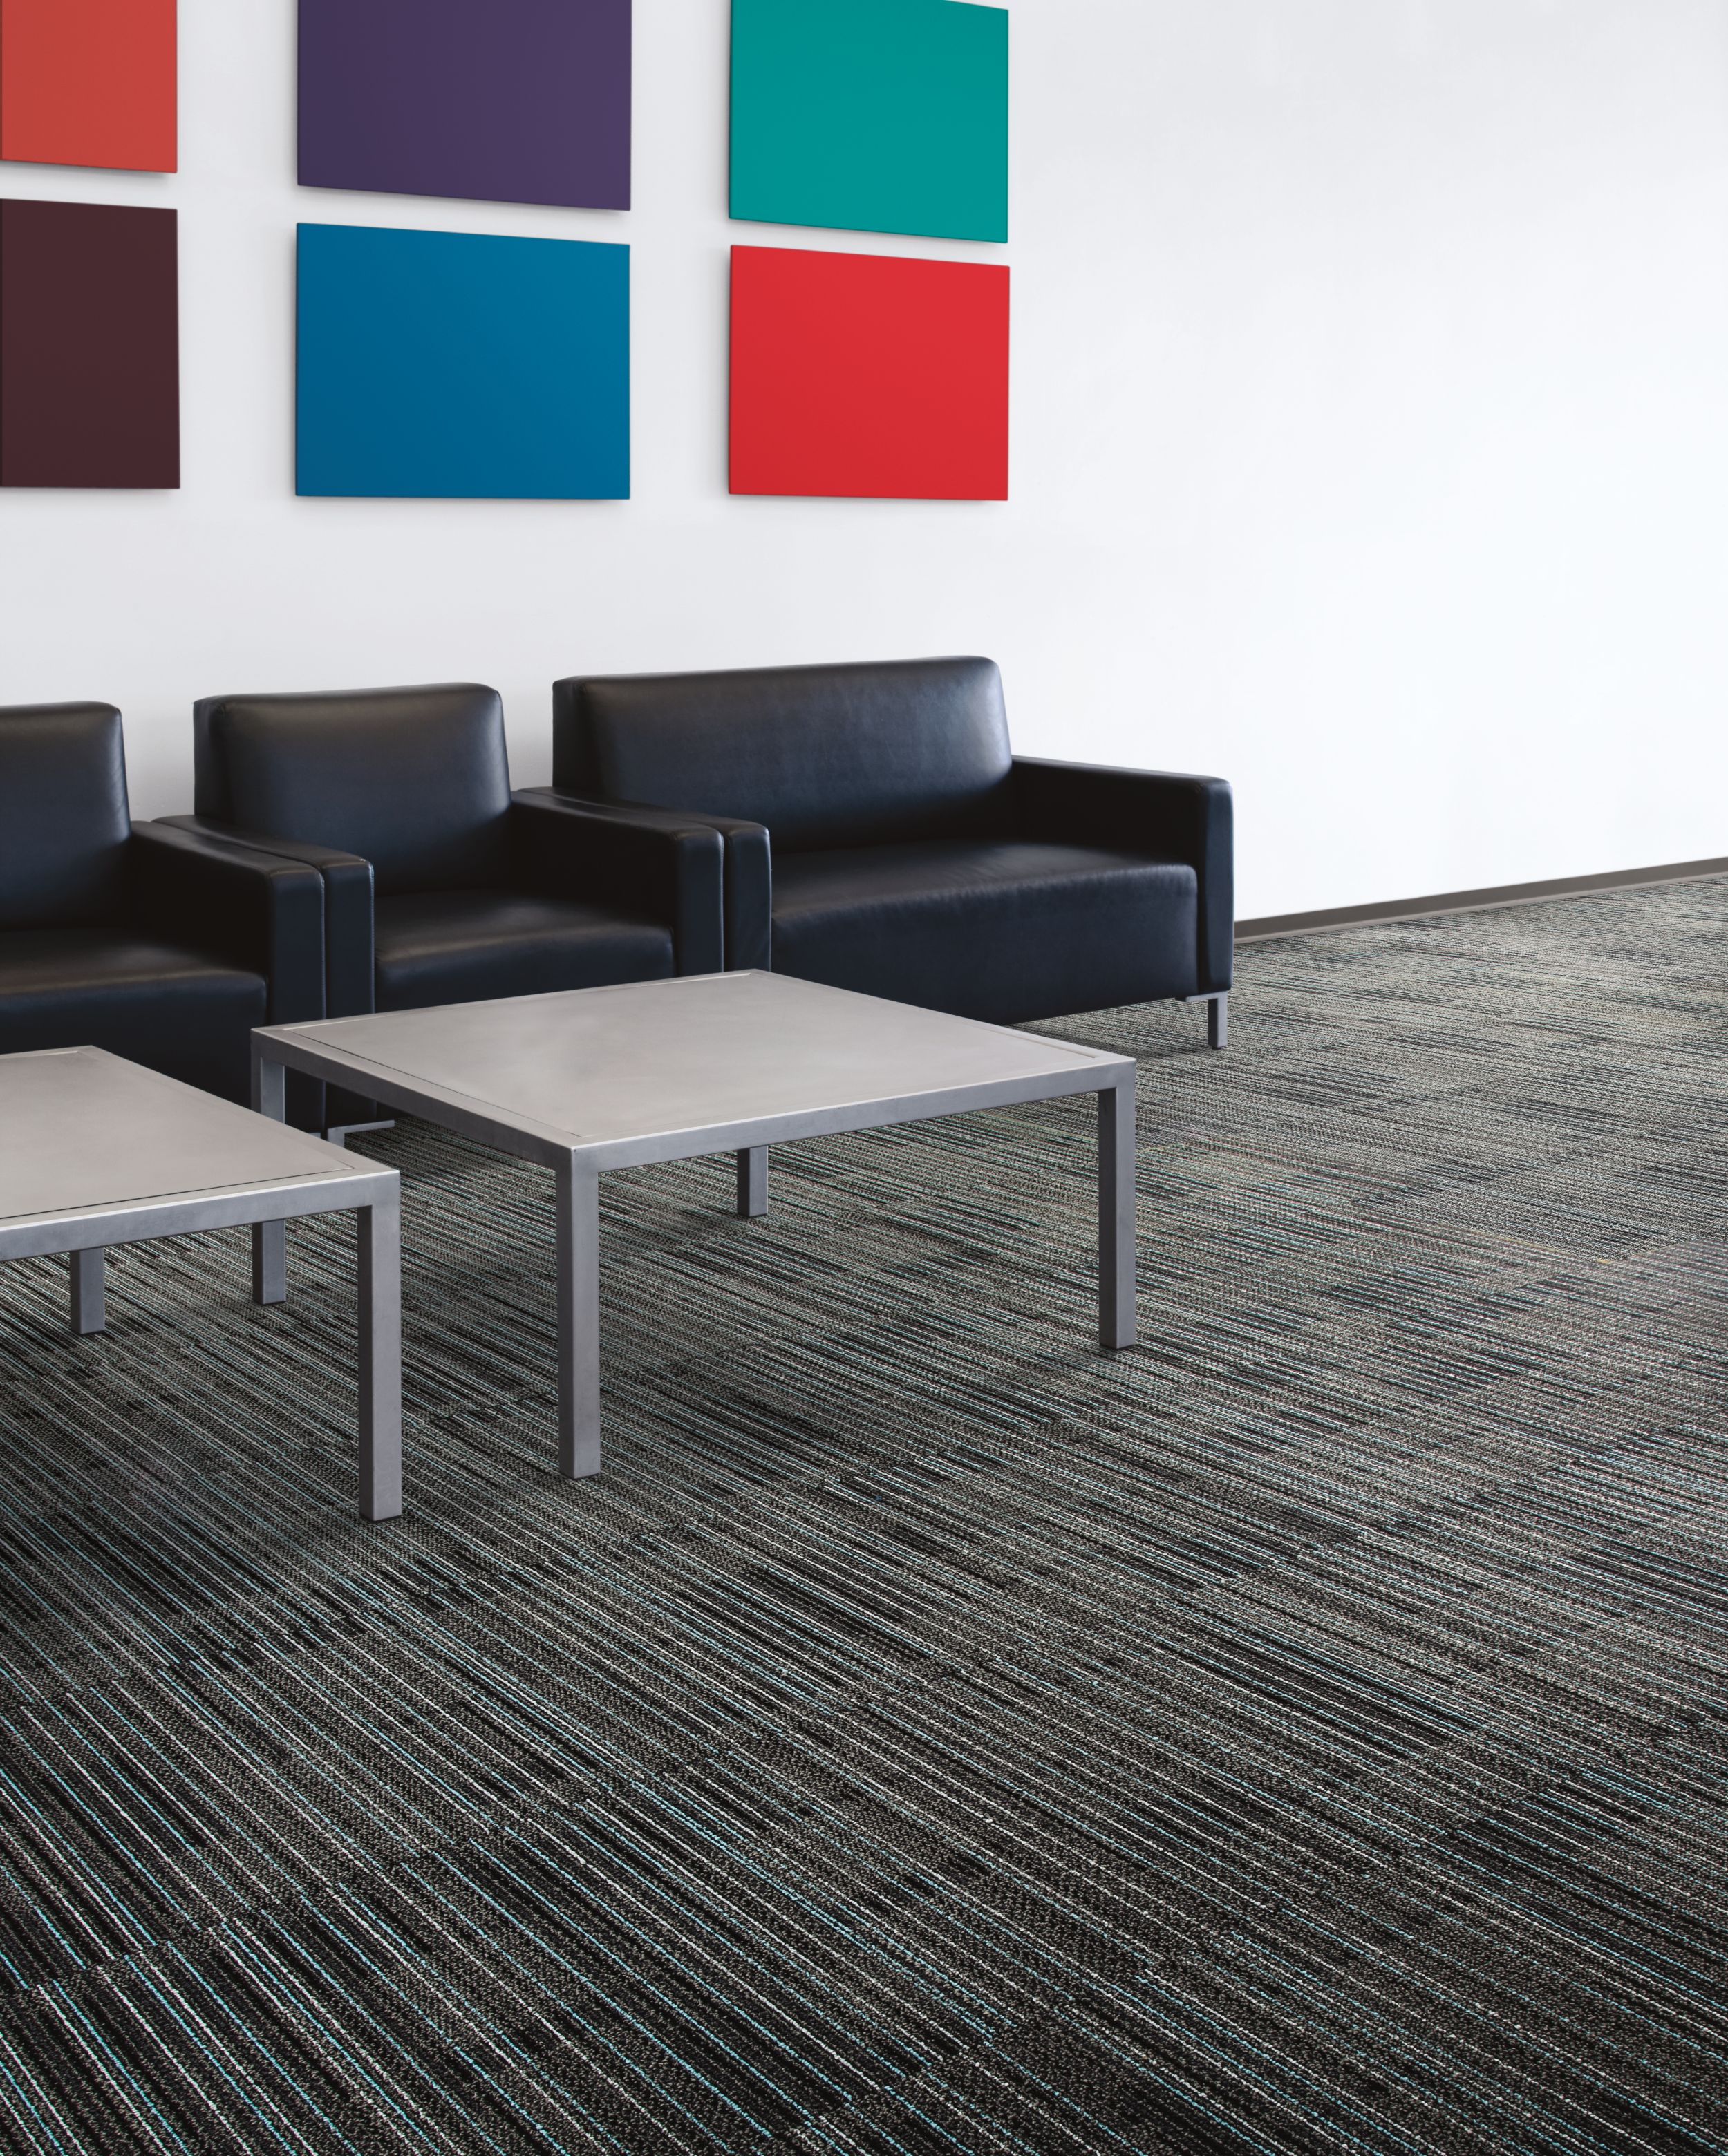 Interface Gather carpet tile in seating area with black chairs and colorful artwork image number 2